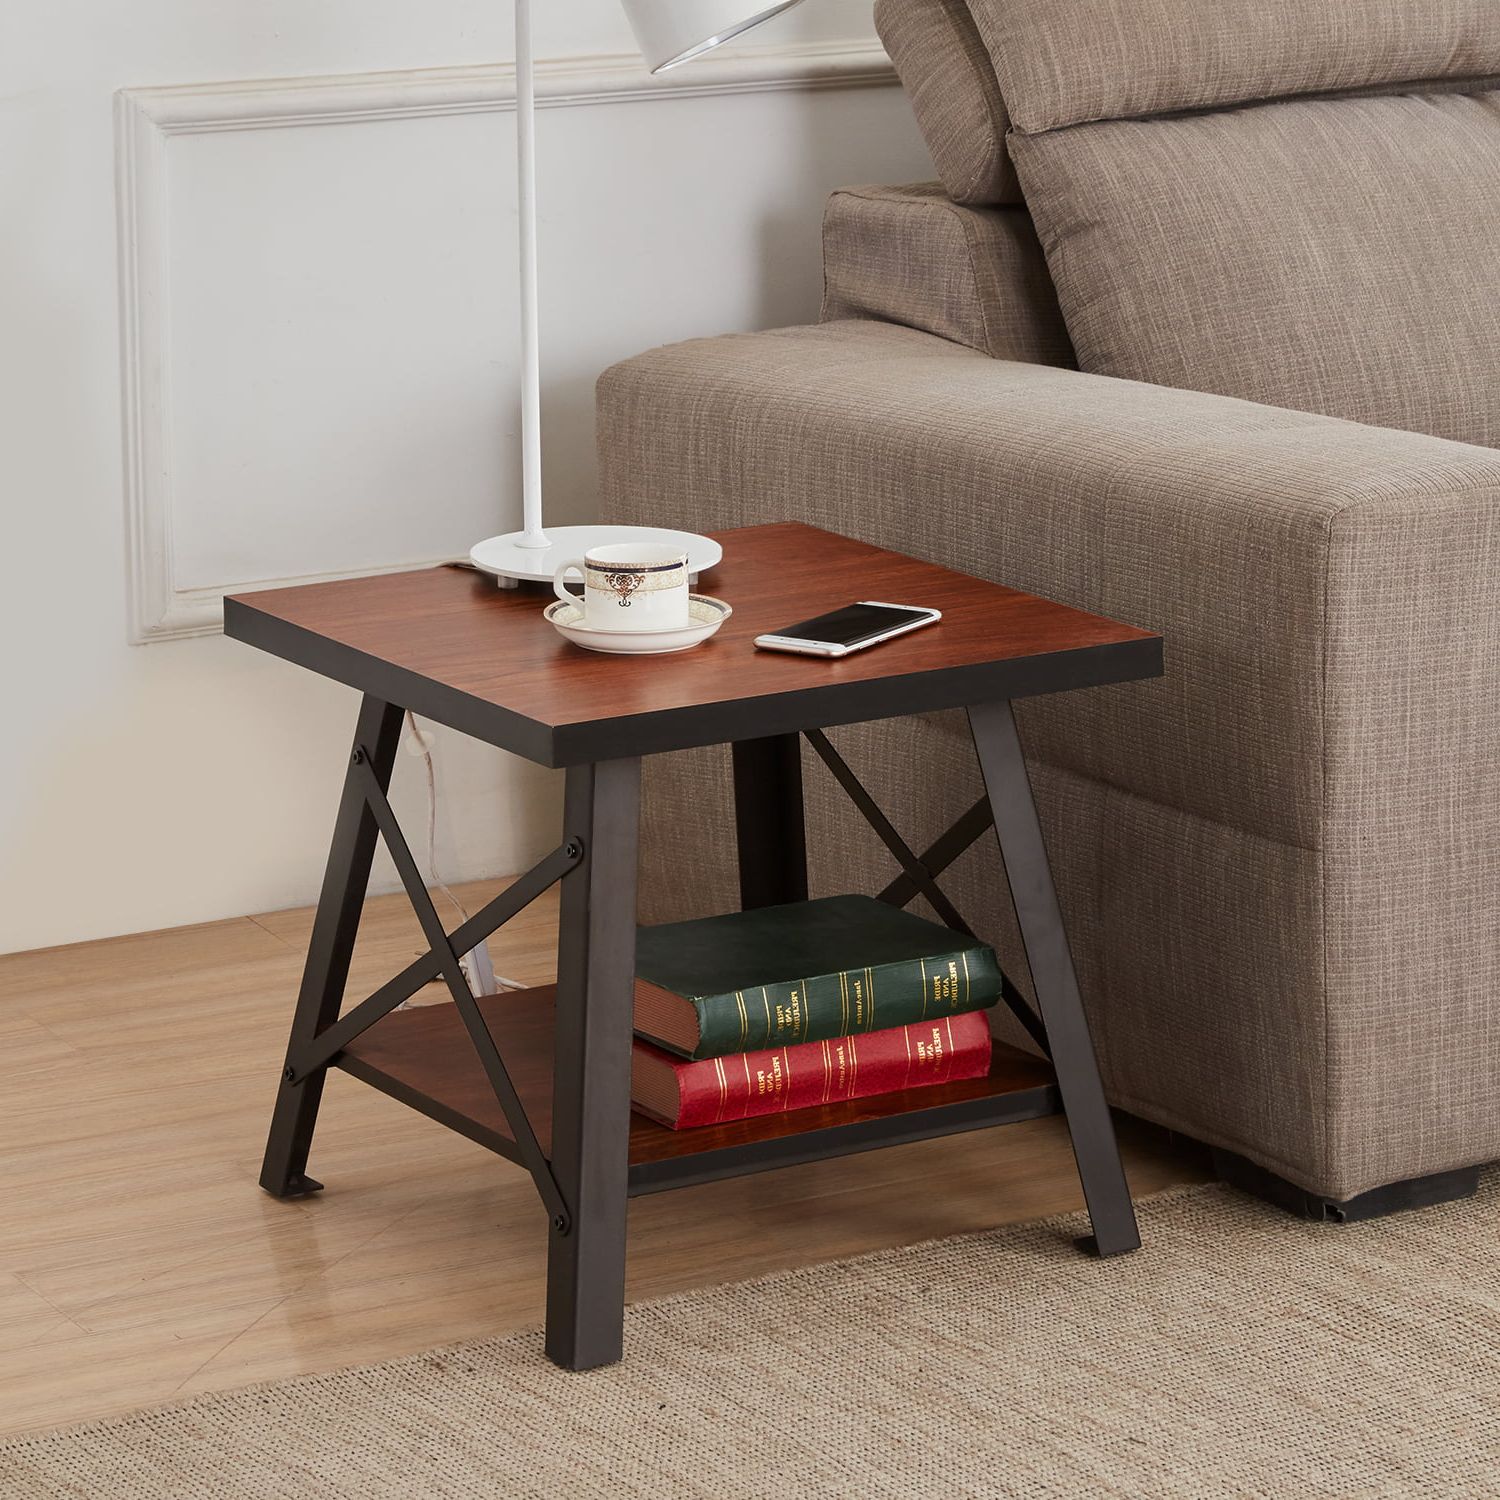 Recent Coffee Tables With Open Storage Shelves In 20" Open Storage Shelf Coffee Table End Table Square,industrial Style (View 5 of 15)